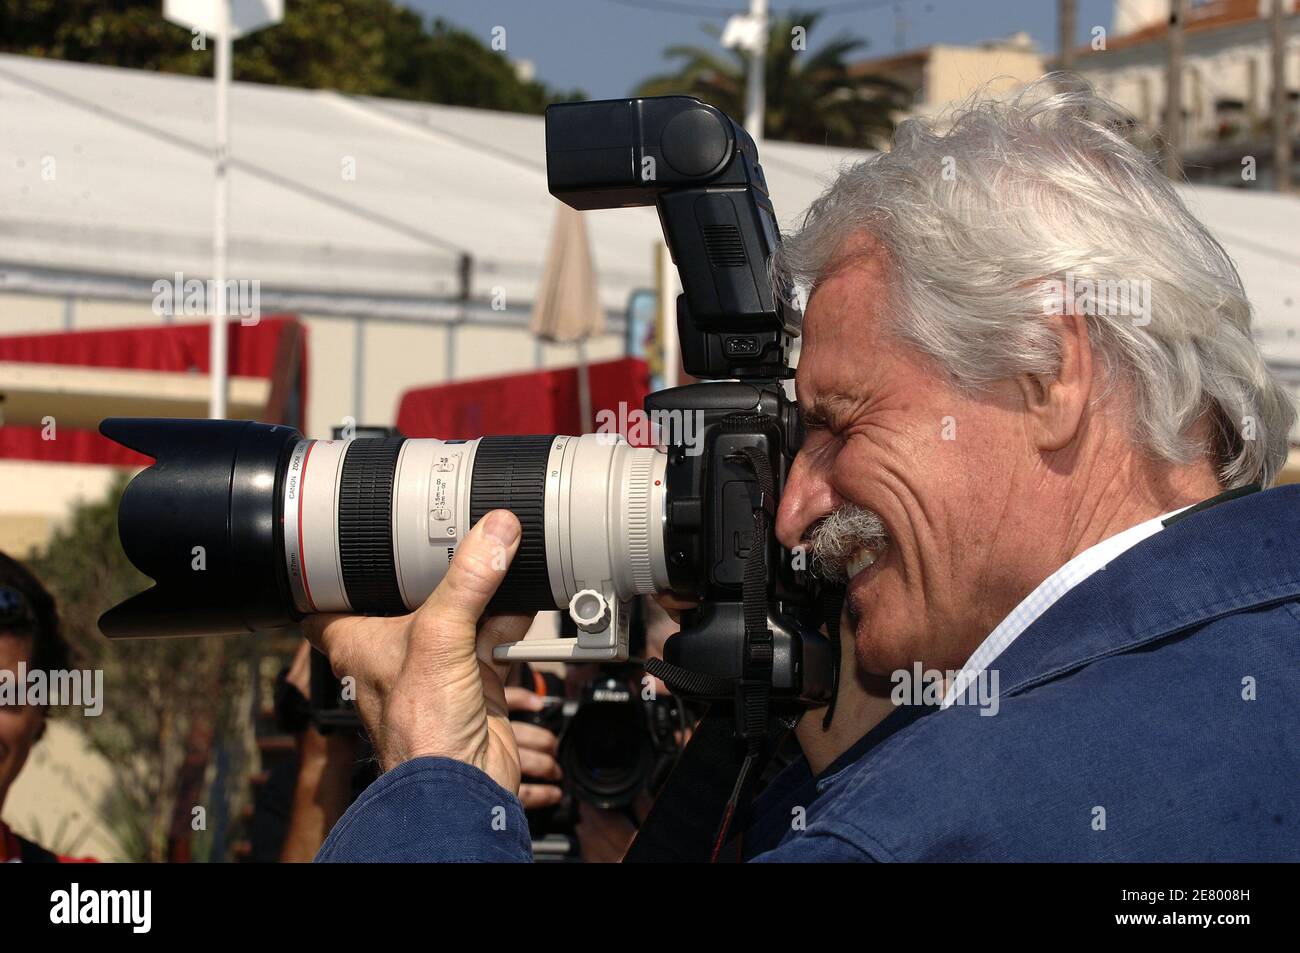 French photographer and procucer Yann Arthus-Bertrand poses for a photocall  during the MIP TV festival in Cannes, French Riviera, France, on April 17,  2007. Photo by Giancarlo Gorassini/ABACAPRESS.COM Stock Photo - Alamy